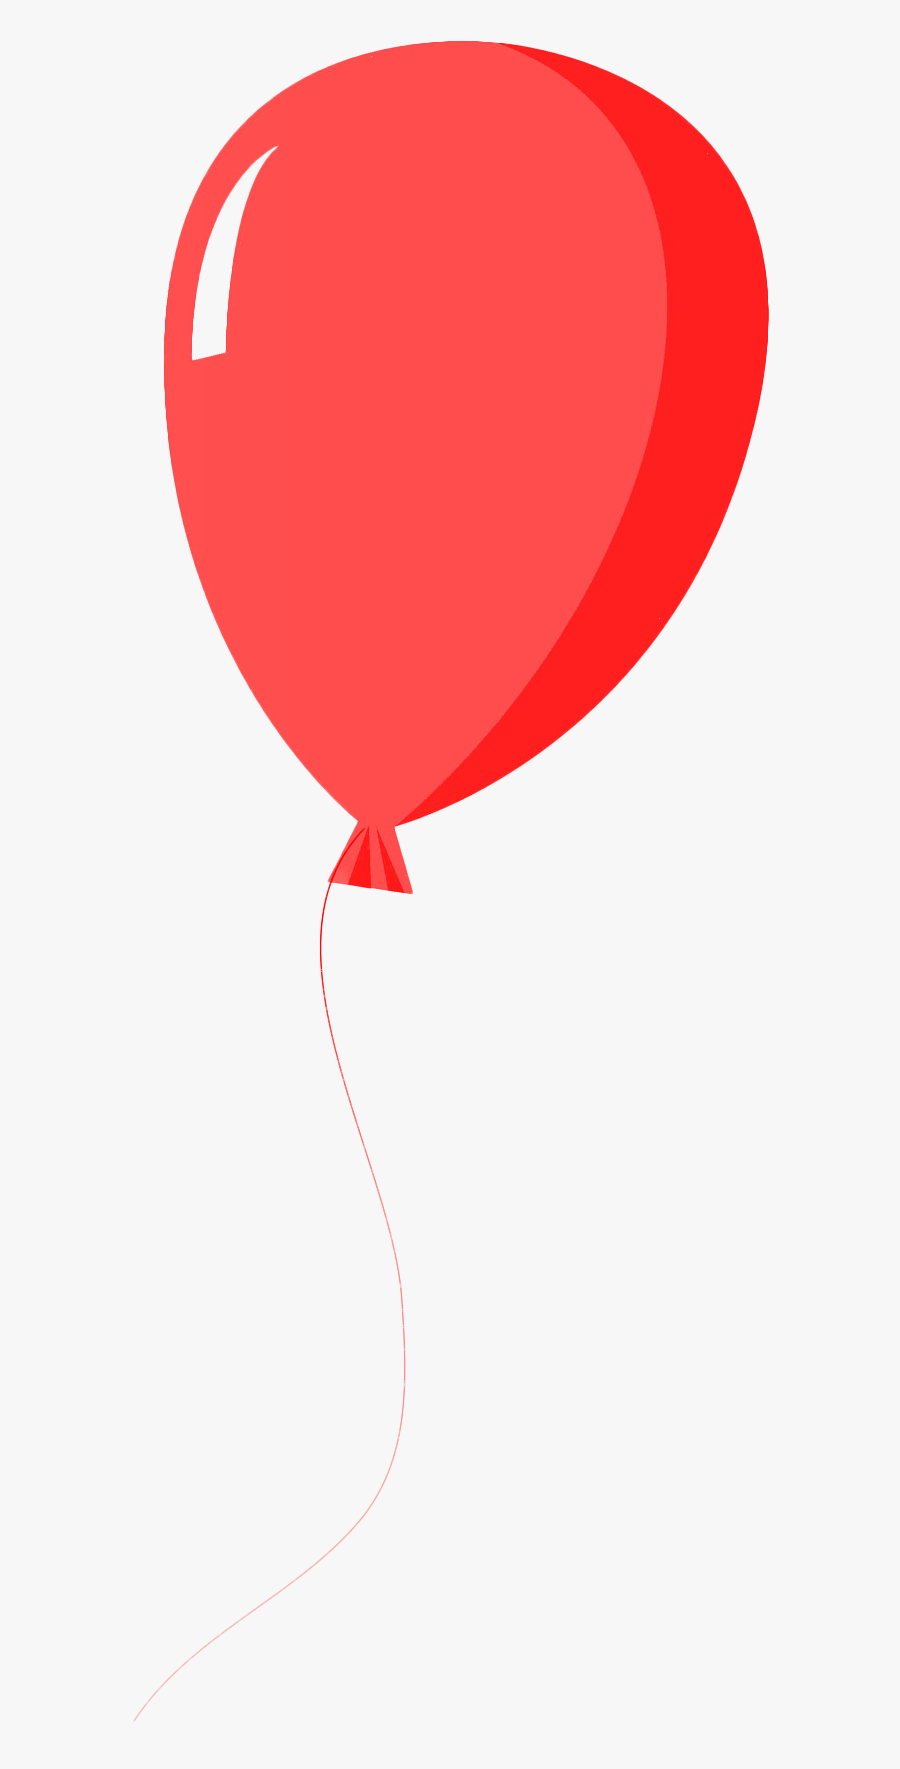 Hd Balloon With String, Transparent Clipart